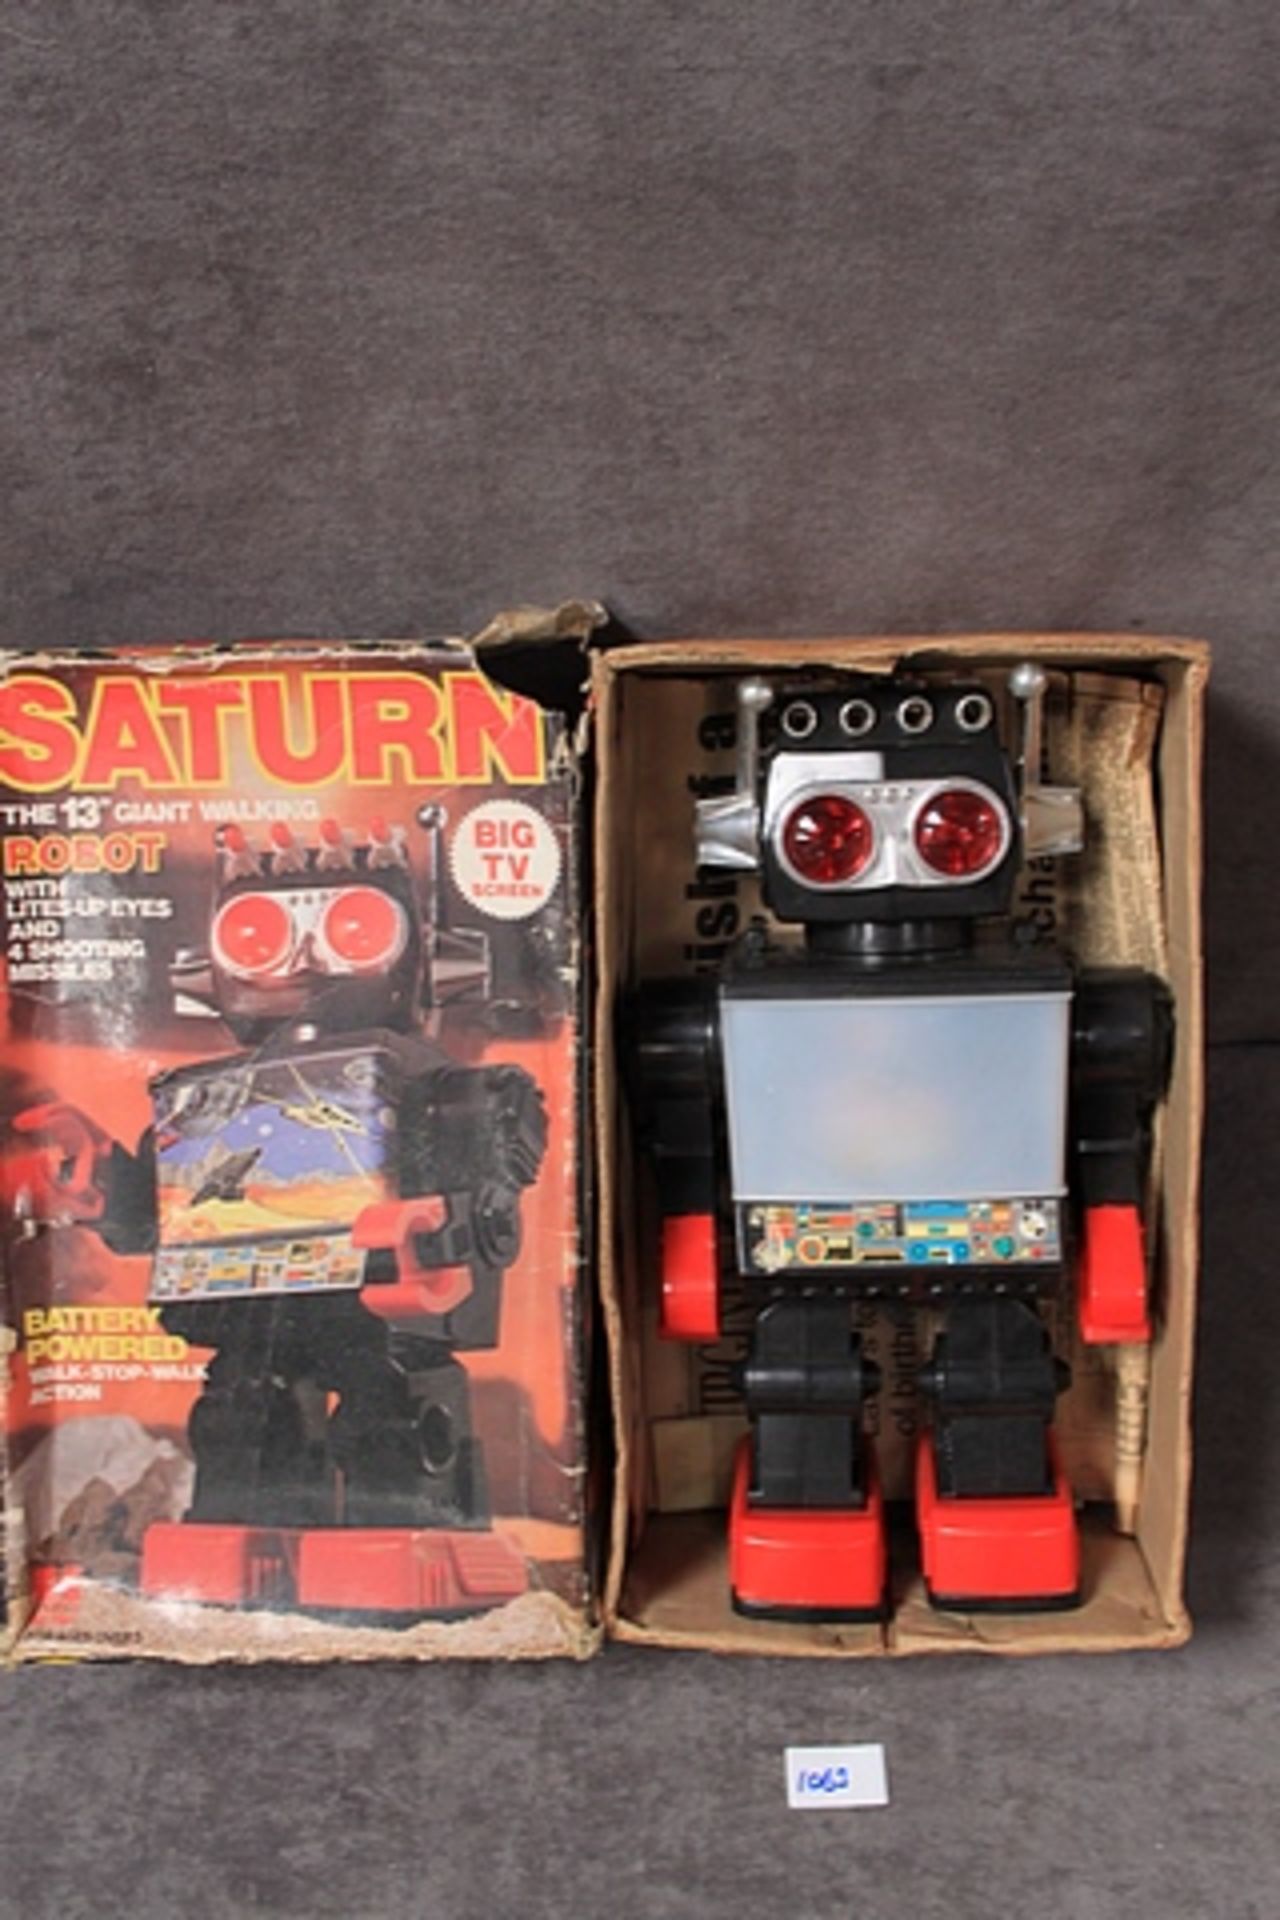 Kamco (Hong Kong) #1981 Saturn 13" Robot in a poor box (missiles missing) - Image 3 of 4